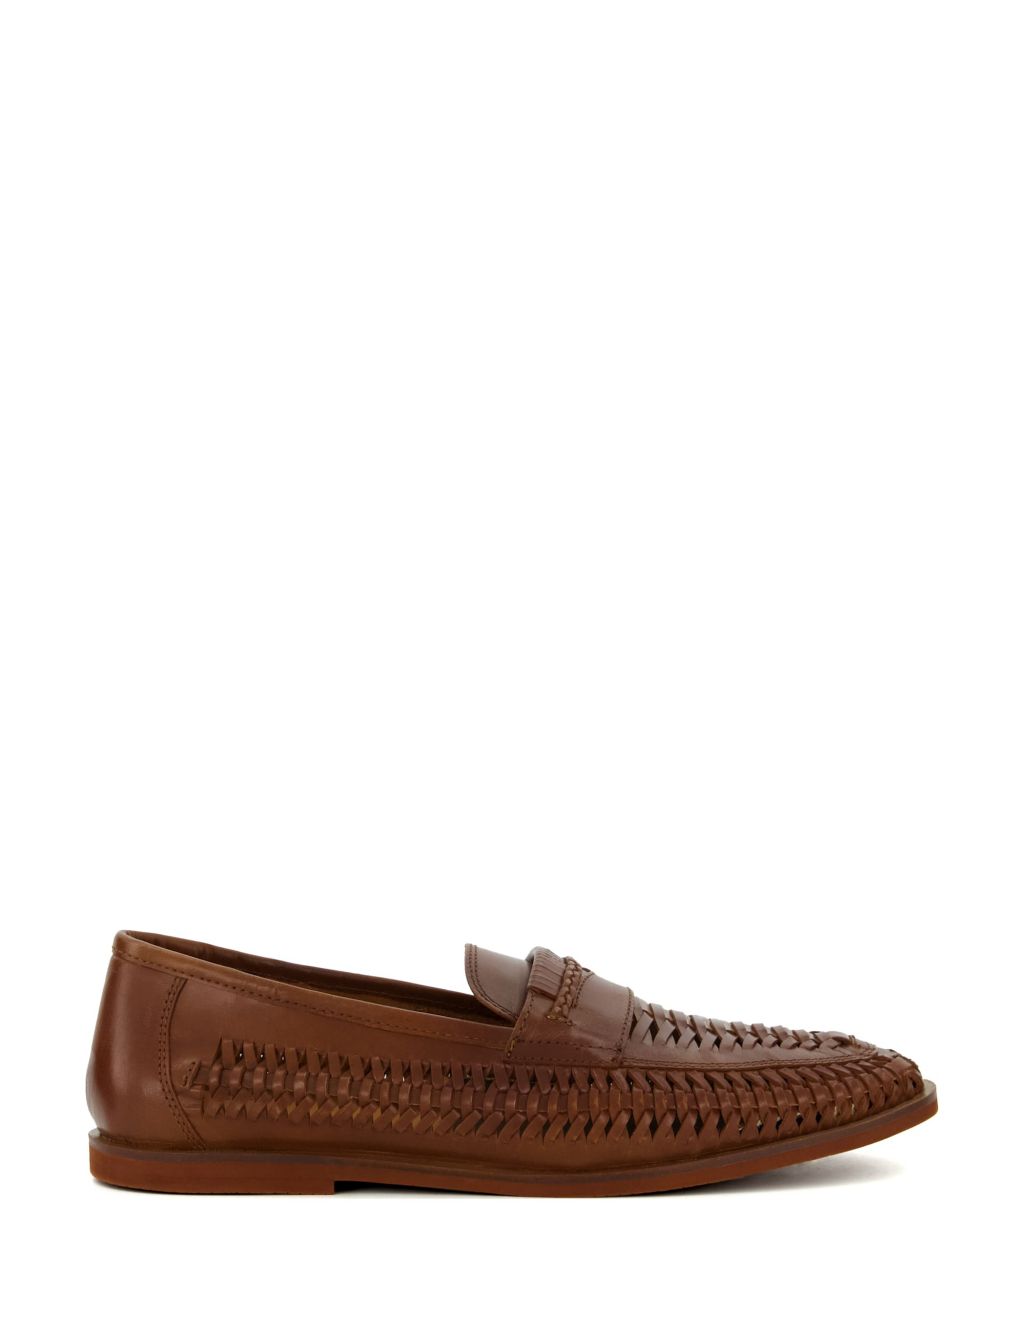 Leather Woven Flat Loafers image 1